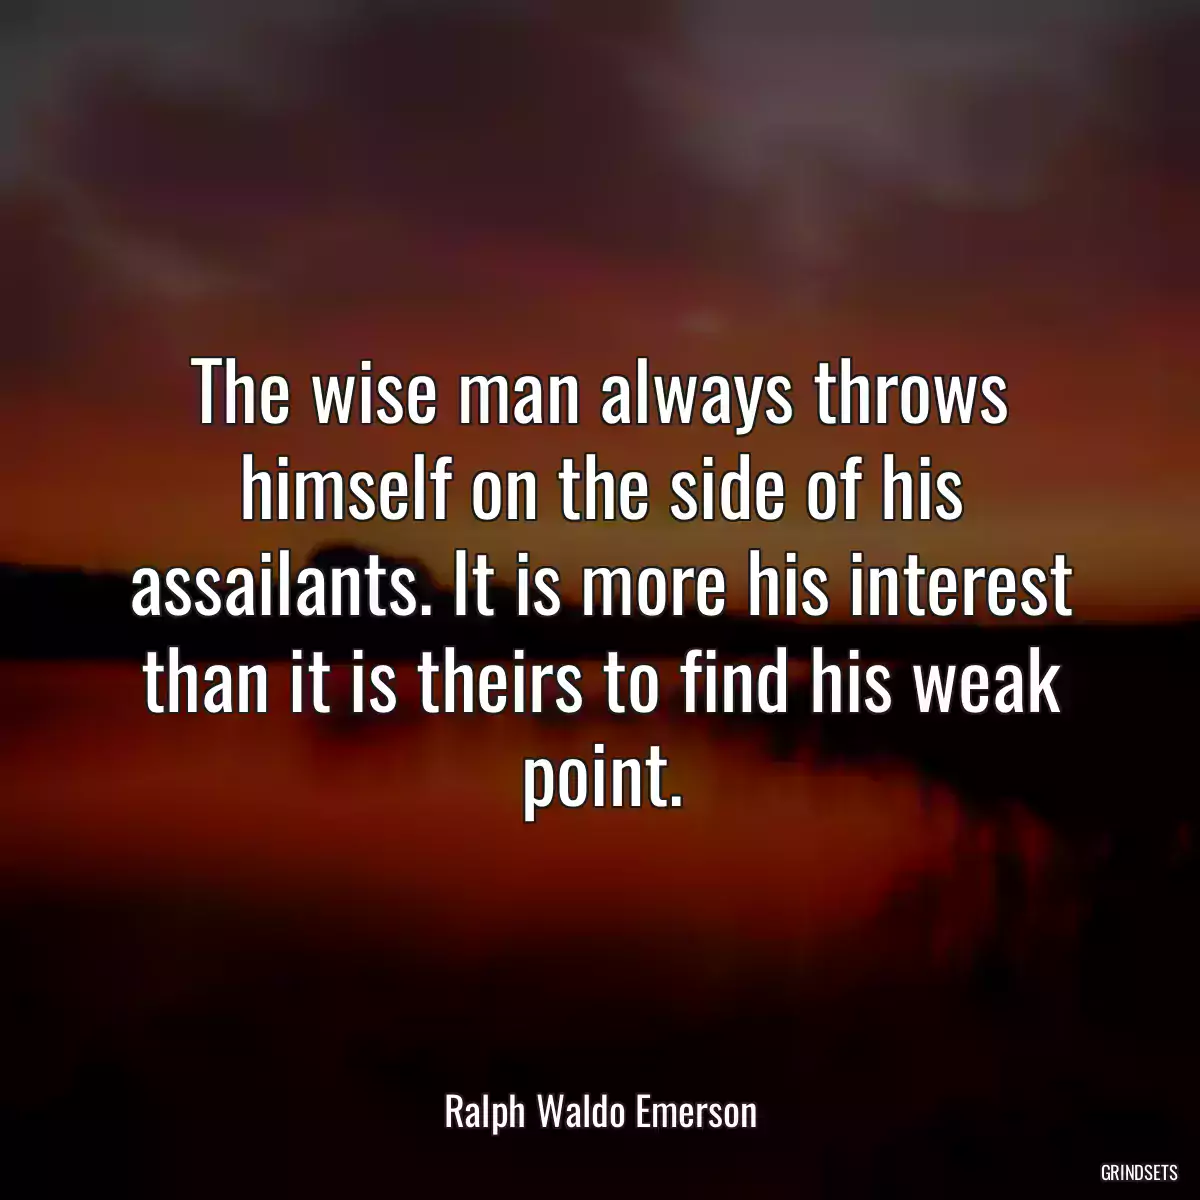 The wise man always throws himself on the side of his assailants. It is more his interest than it is theirs to find his weak point.